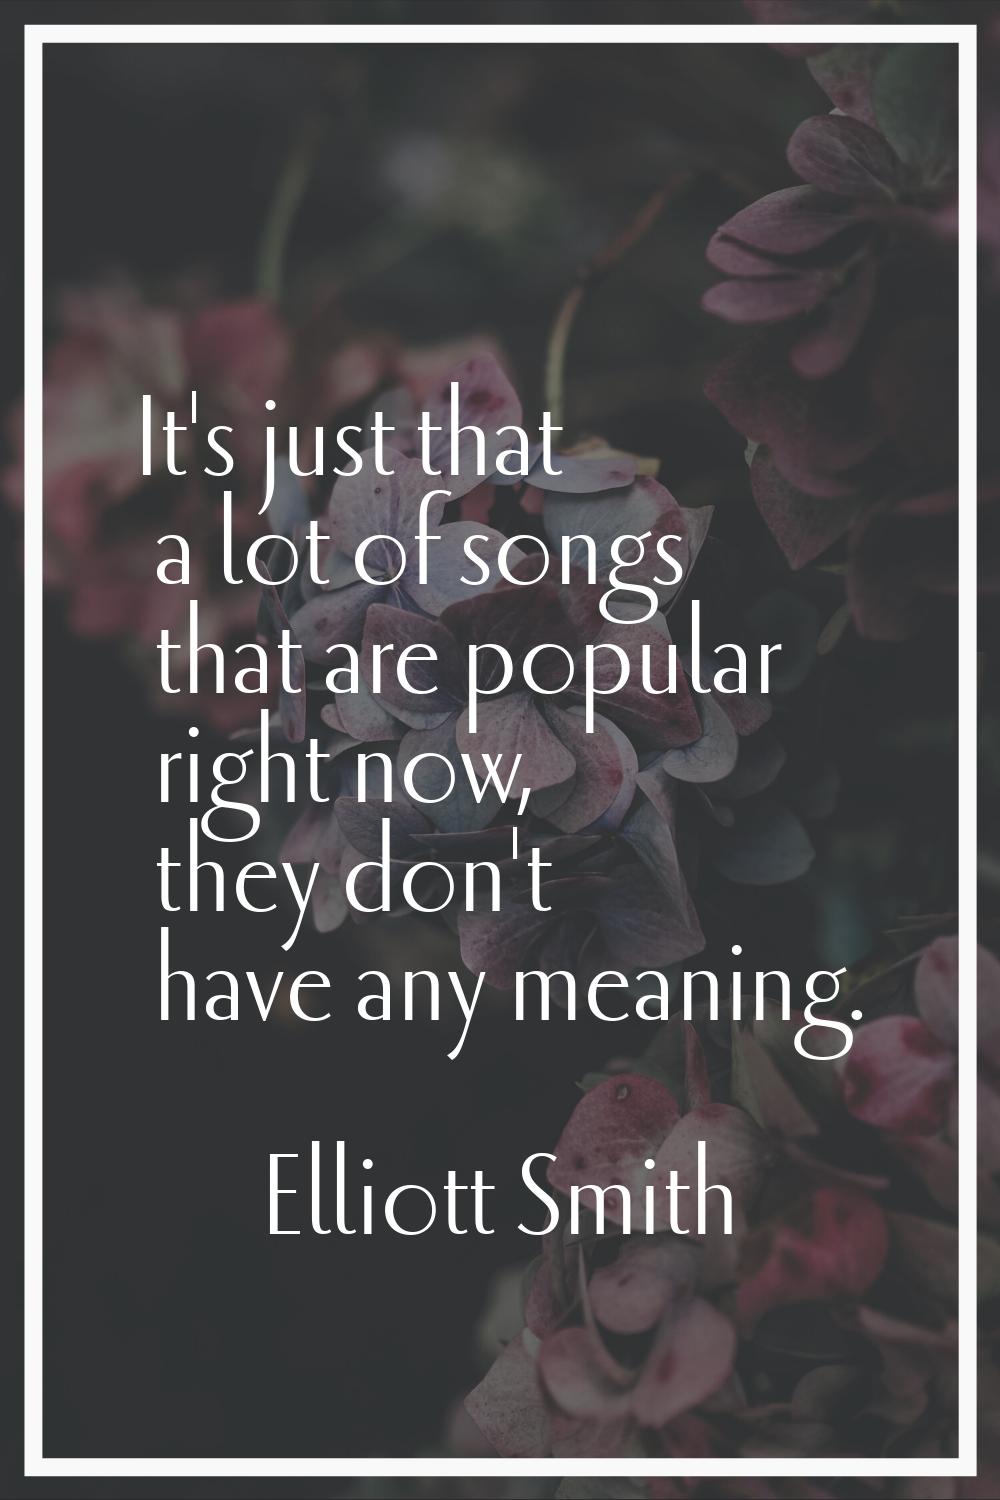 It's just that a lot of songs that are popular right now, they don't have any meaning.